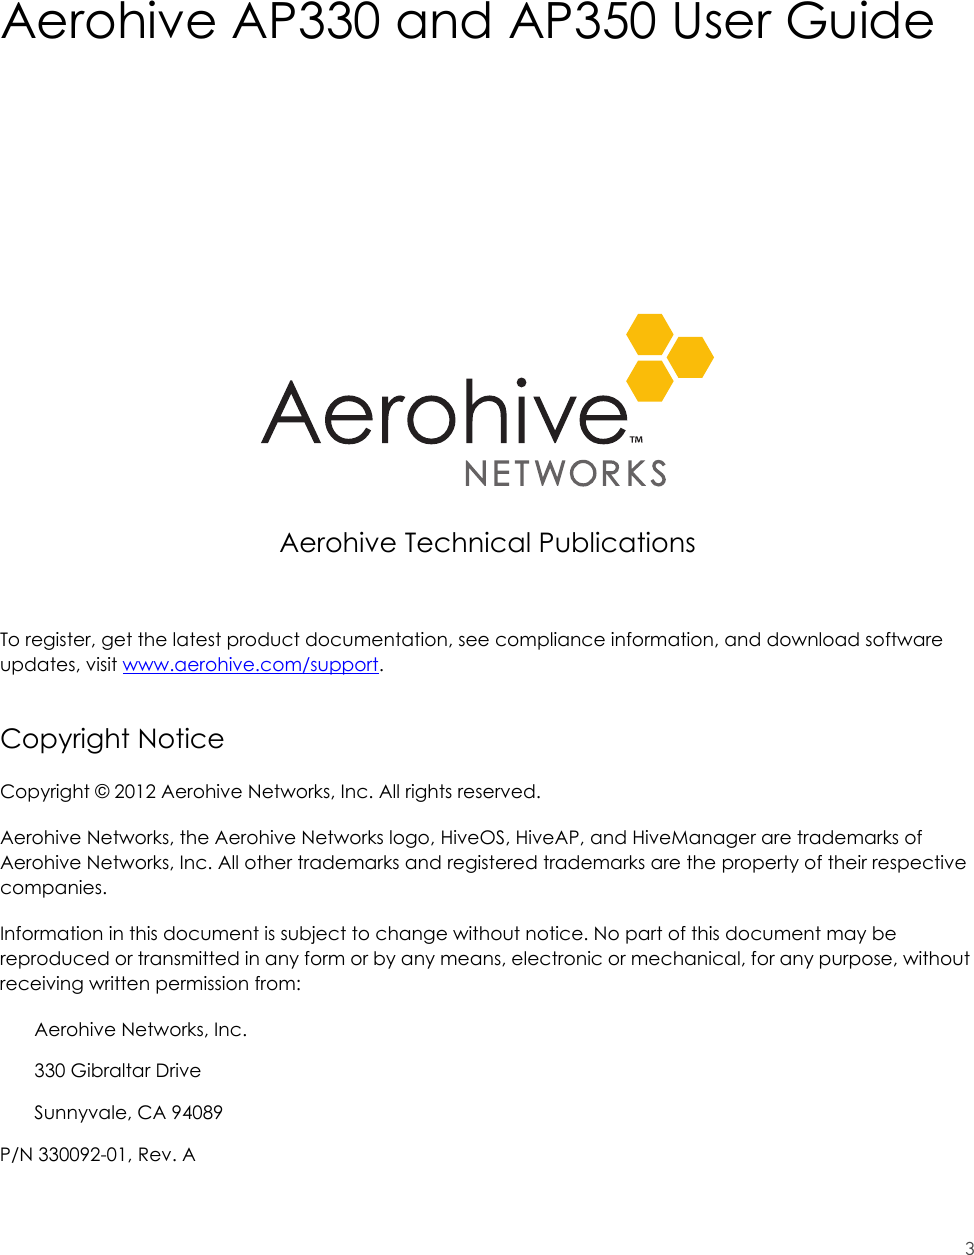 3Aerohive AP330 and AP350 User GuideAerohive Technical PublicationsTo register, get the latest product documentation, see compliance information, and download software updates, visit www.aerohive.com/support.Copyright NoticeCopyright © 2012 Aerohive Networks, Inc. All rights reserved.Aerohive Networks, the Aerohive Networks logo, HiveOS, HiveAP, and HiveManager are trademarks of Aerohive Networks, Inc. All other trademarks and registered trademarks are the property of their respective companies.Information in this document is subject to change without notice. No part of this document may be reproduced or transmitted in any form or by any means, electronic or mechanical, for any purpose, without receiving written permission from:Aerohive Networks, Inc.330 Gibraltar DriveSunnyvale, CA 94089P/N 330092-01, Rev. A